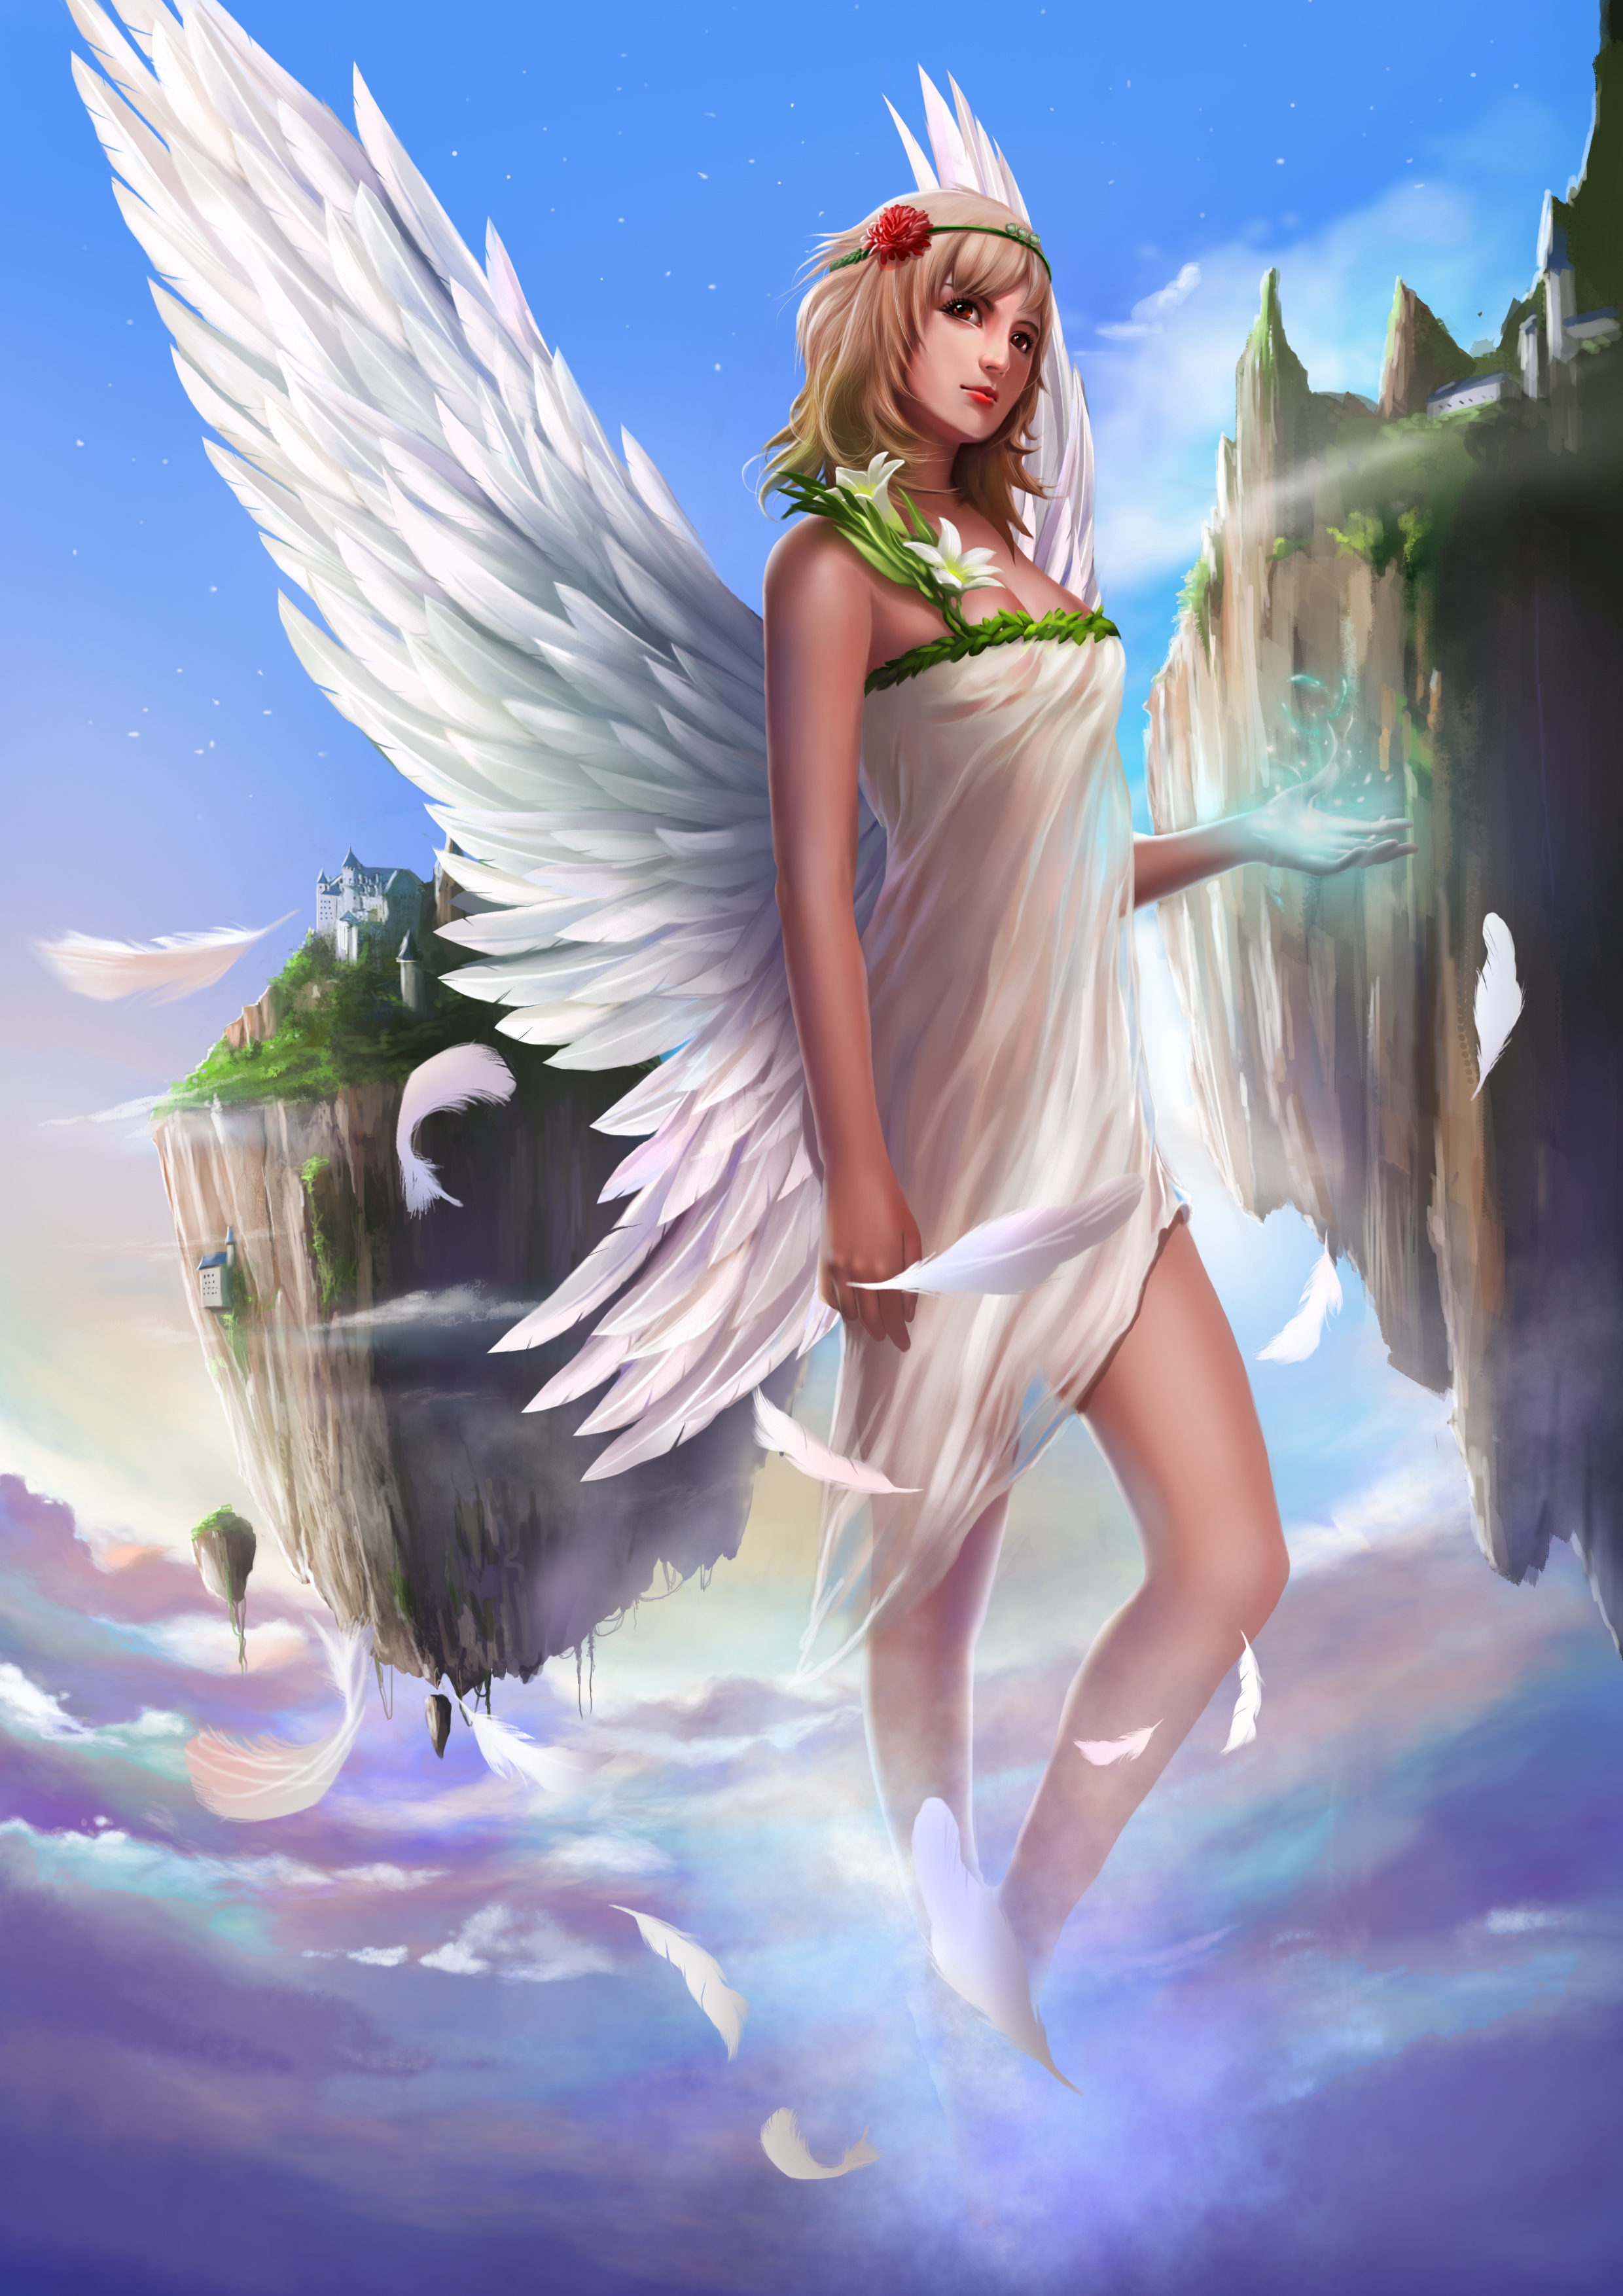 Images Wings female Fantasy Angels 2480x3508 for Mobile phone Girls young woman angel